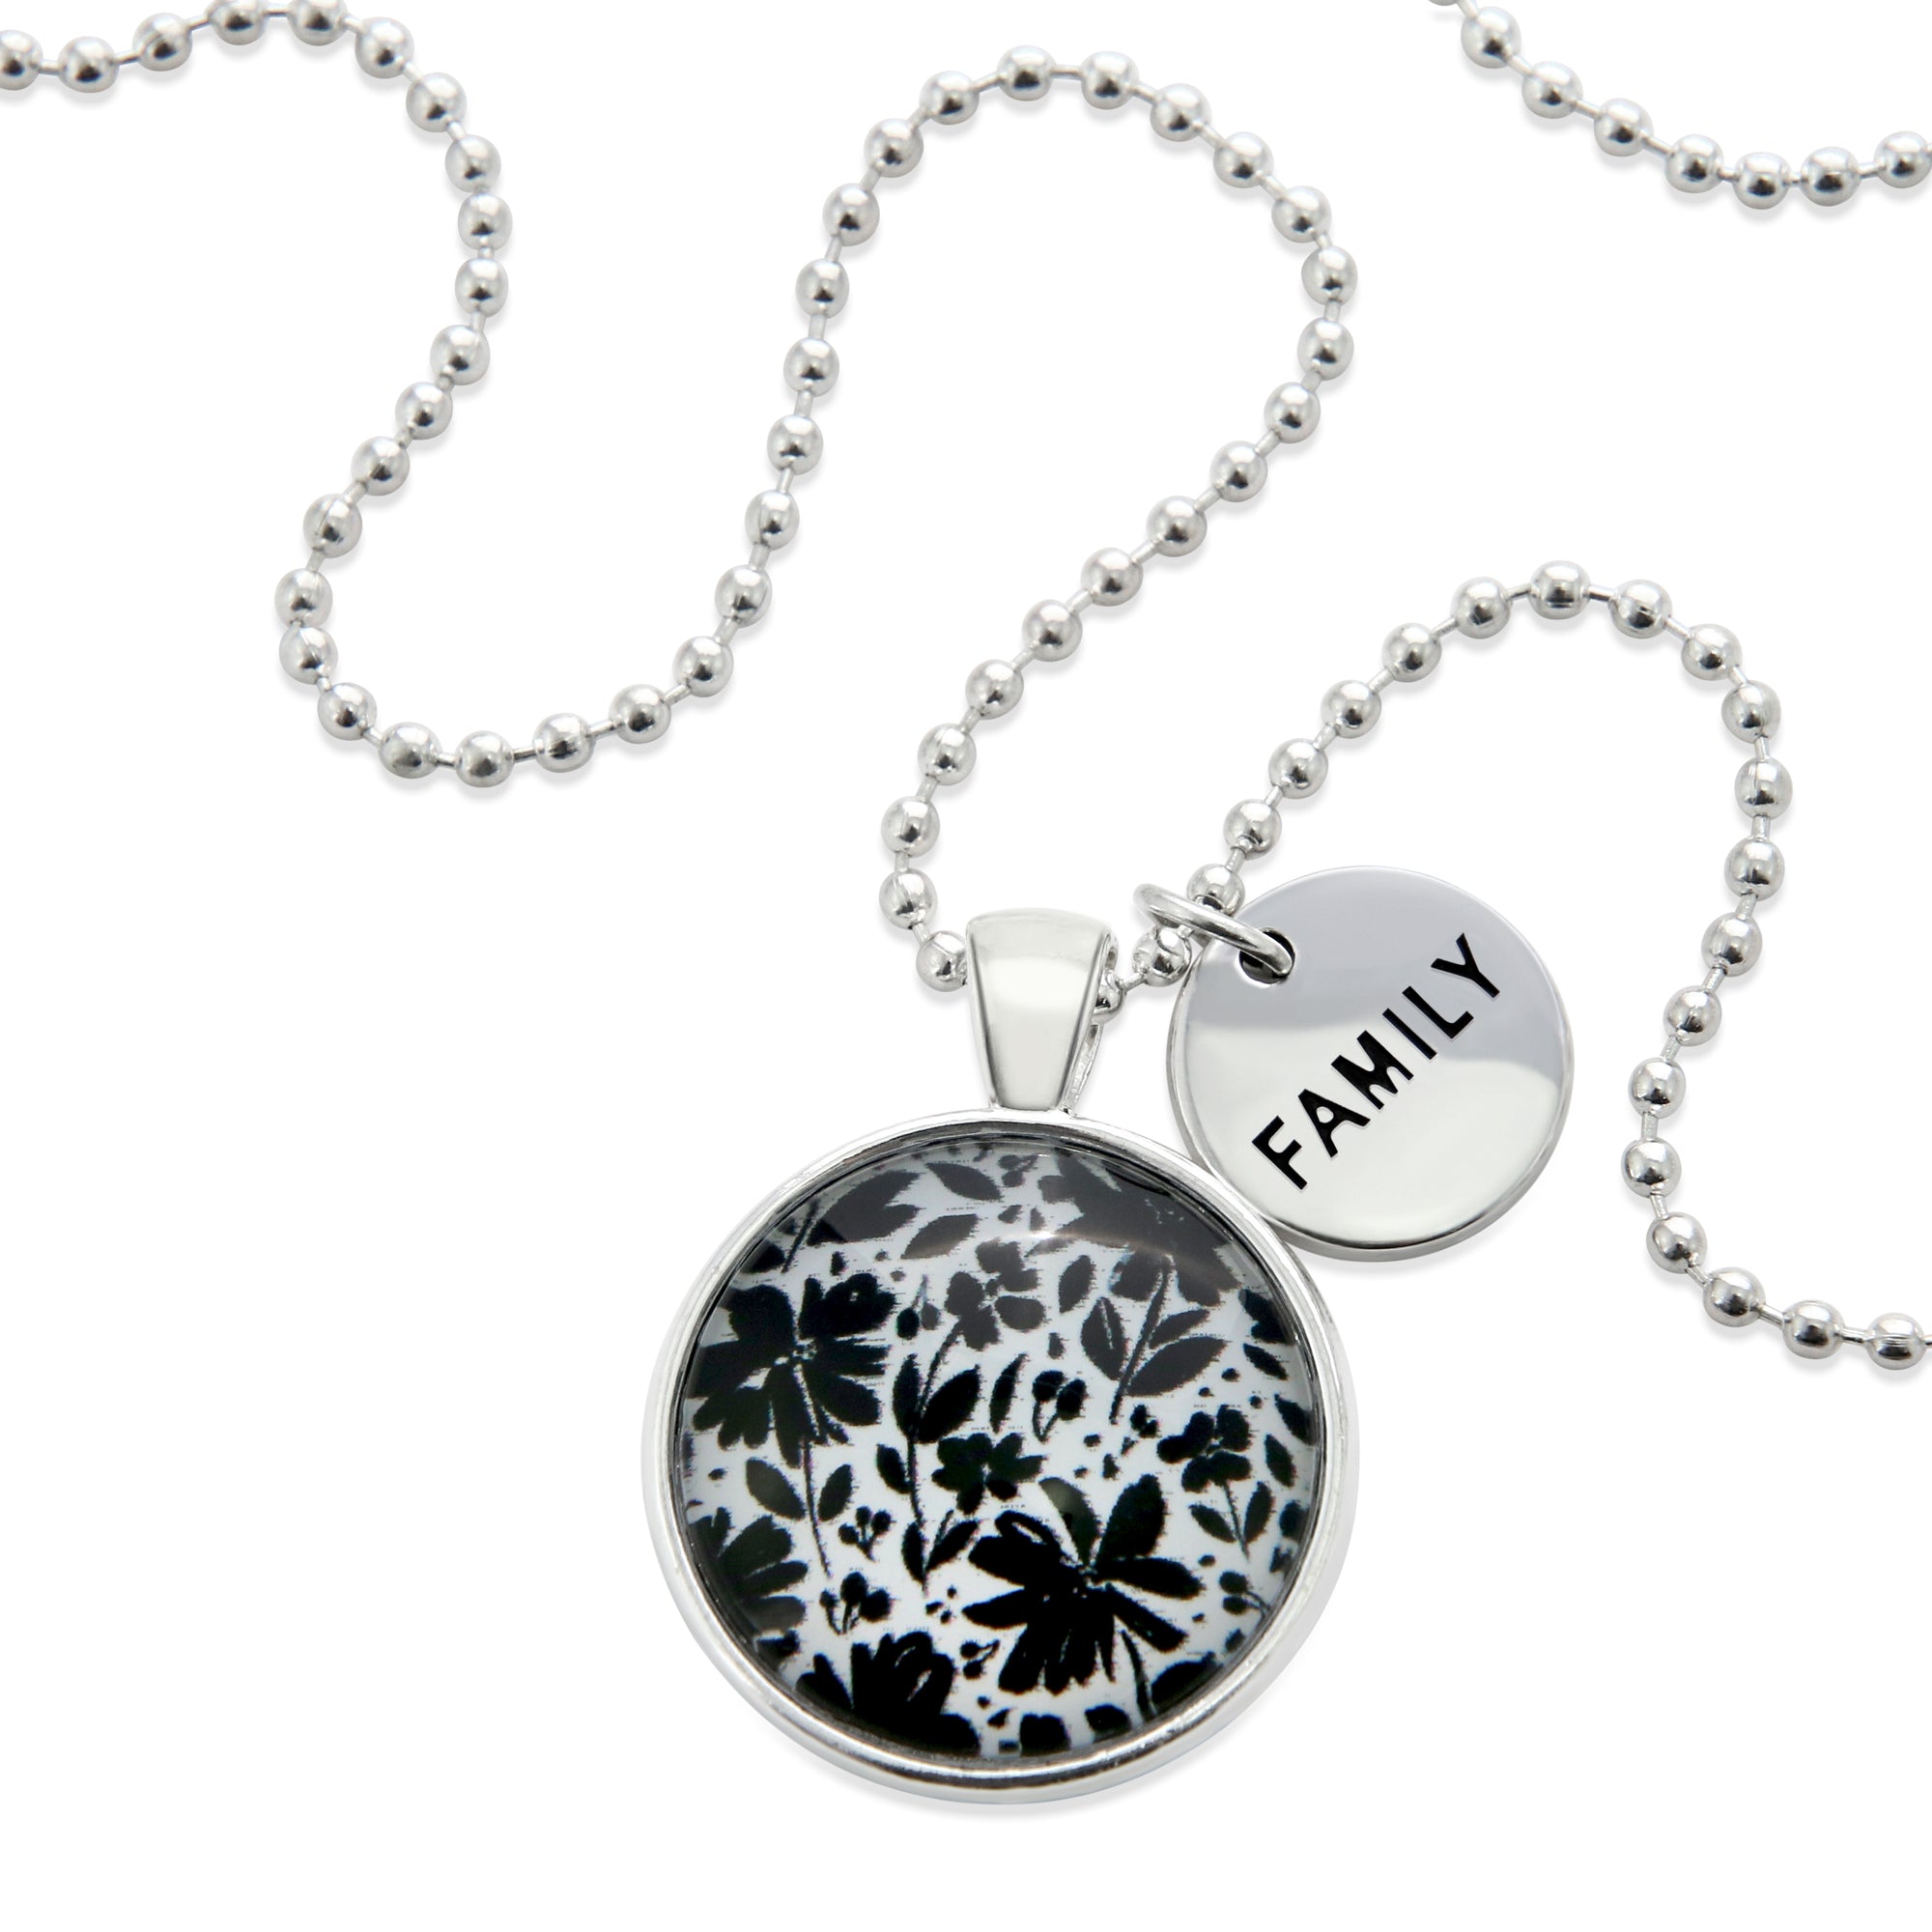 Black & White Collection - Bright Silver 'FAMILY' Necklace - Inky Buds (10812)